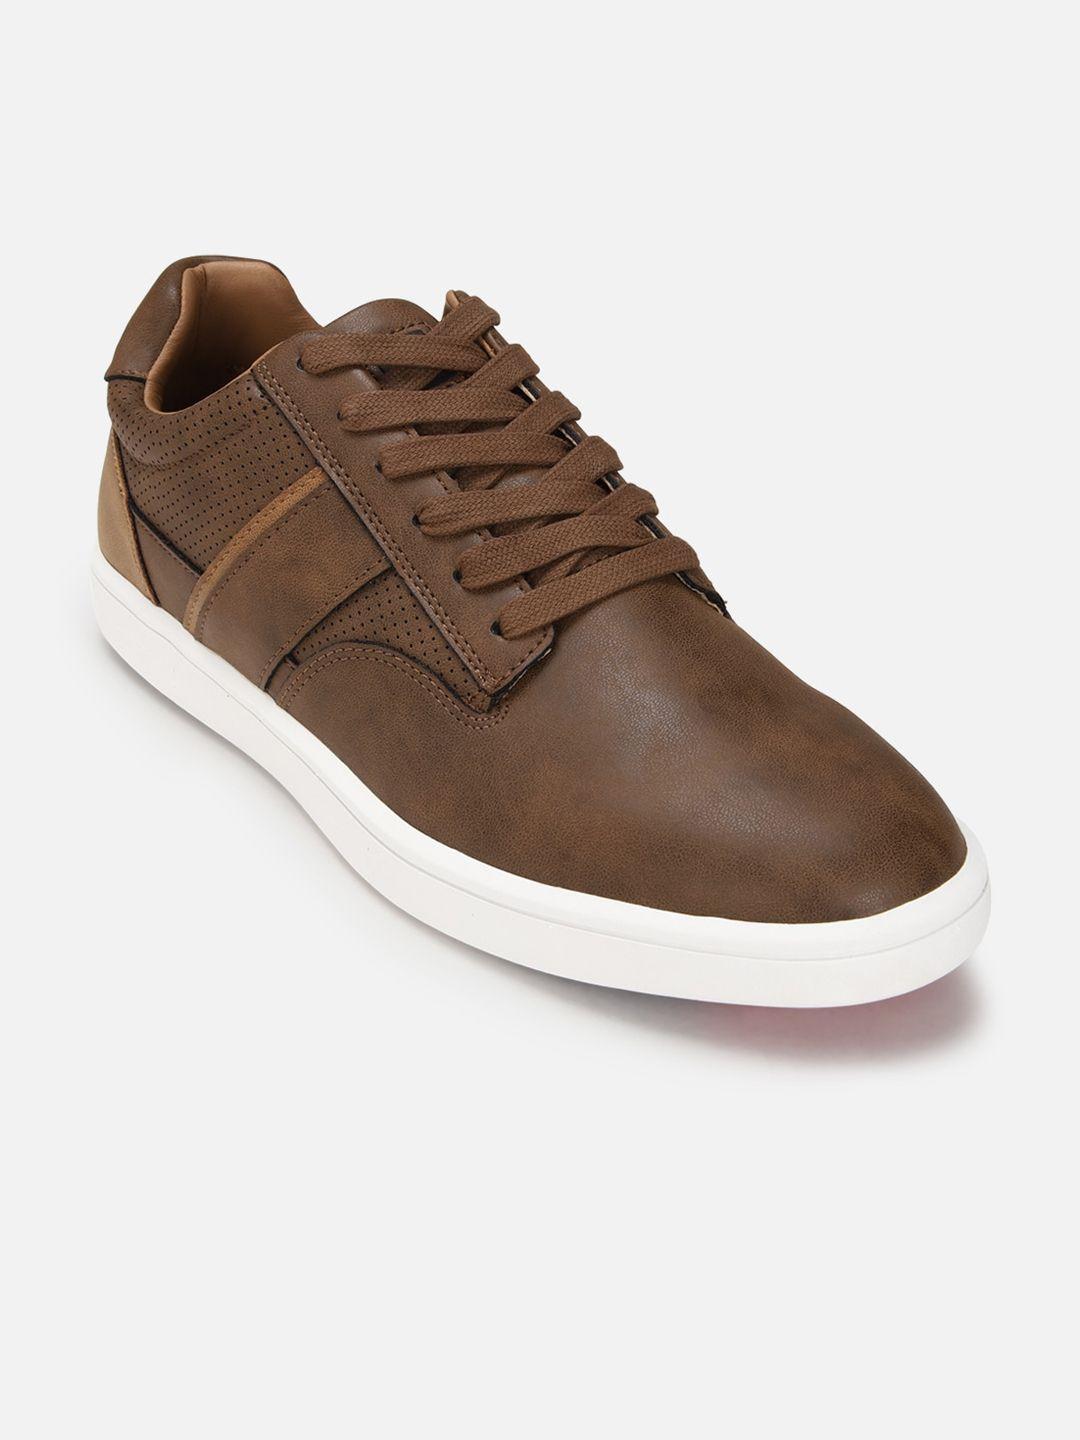 louis philippe sport men leather sneakers